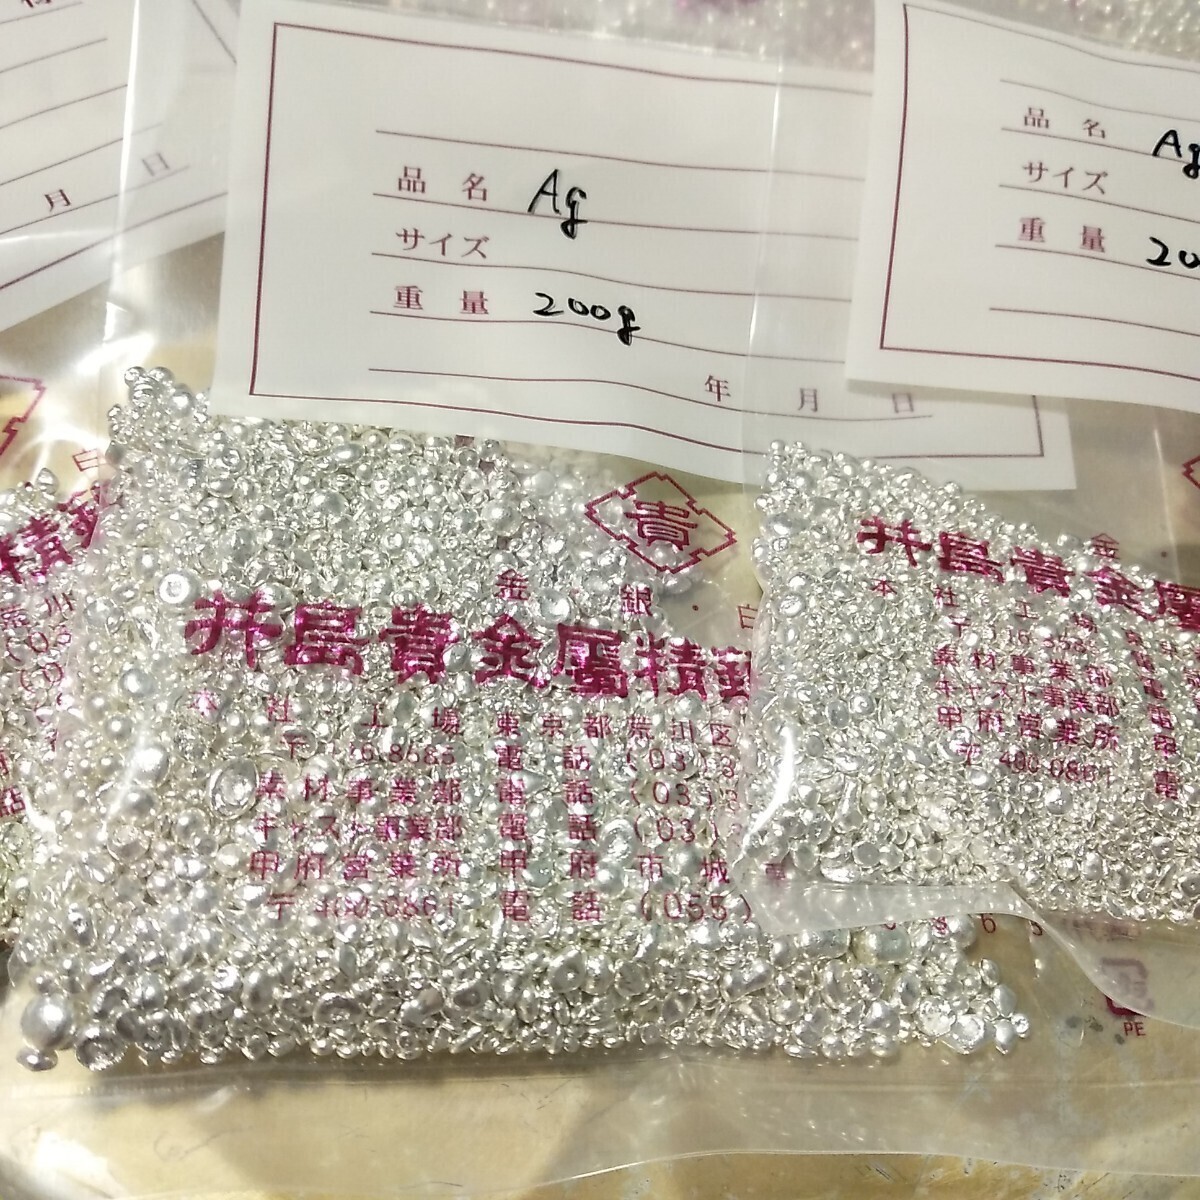 (10,000 jpy OFF coupon,kreka,paypay use possible ) original silver (999.9). blow . silver sa sub ki1000g 1kg engraving processing material, in goto processing for as 